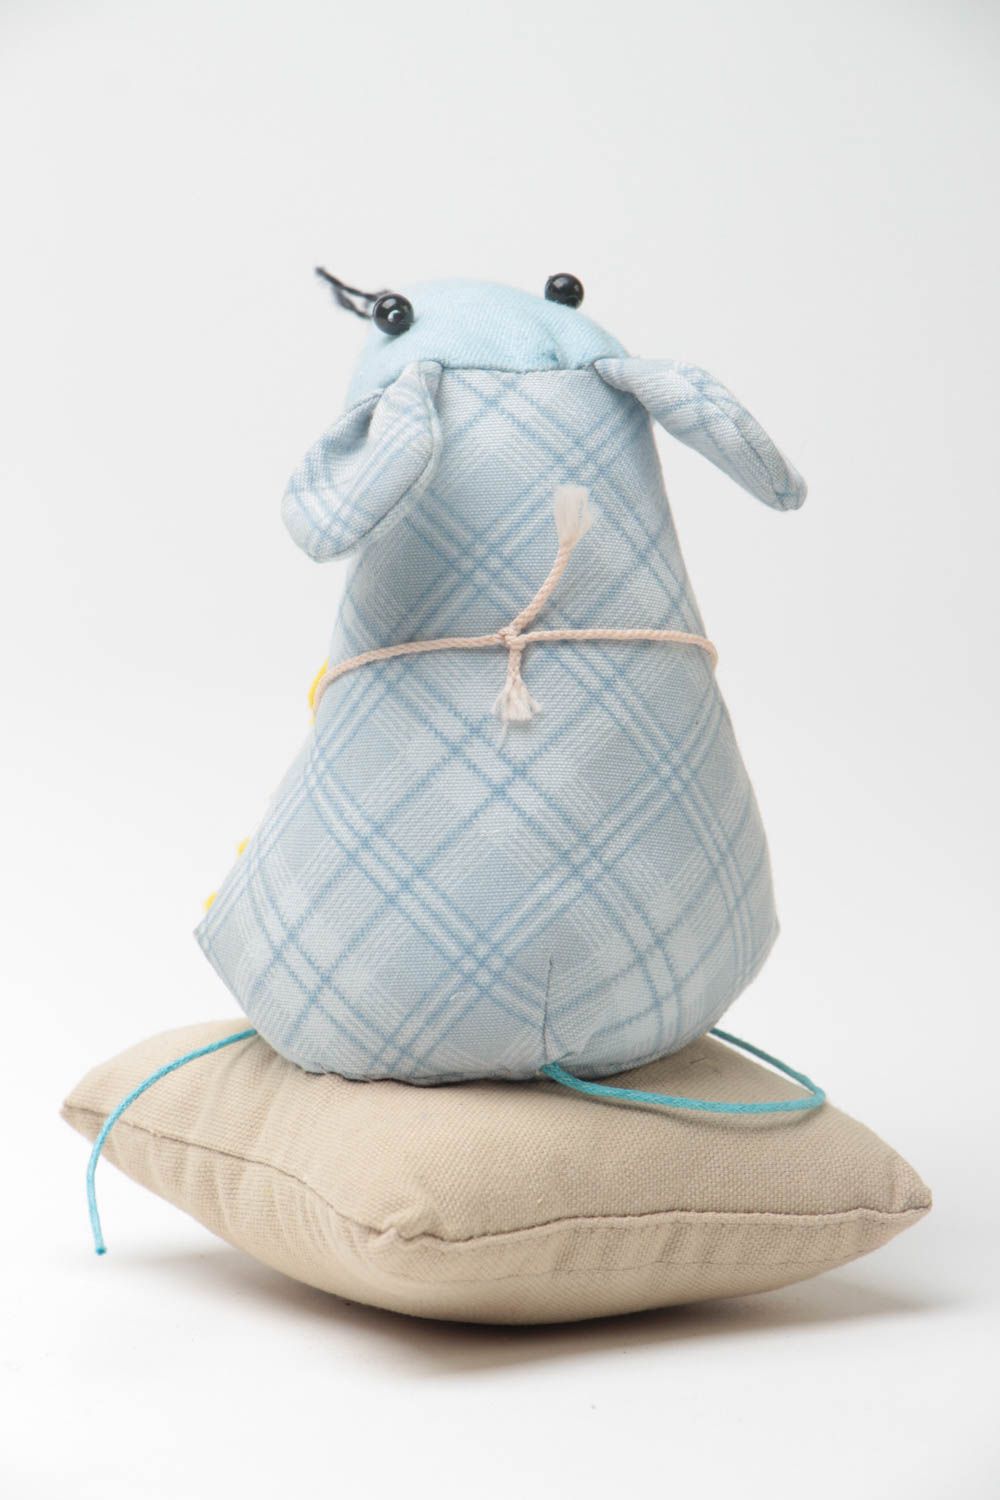 Soft toy rat on pillow sweet handmade fabric blue stuffed toy for children photo 4